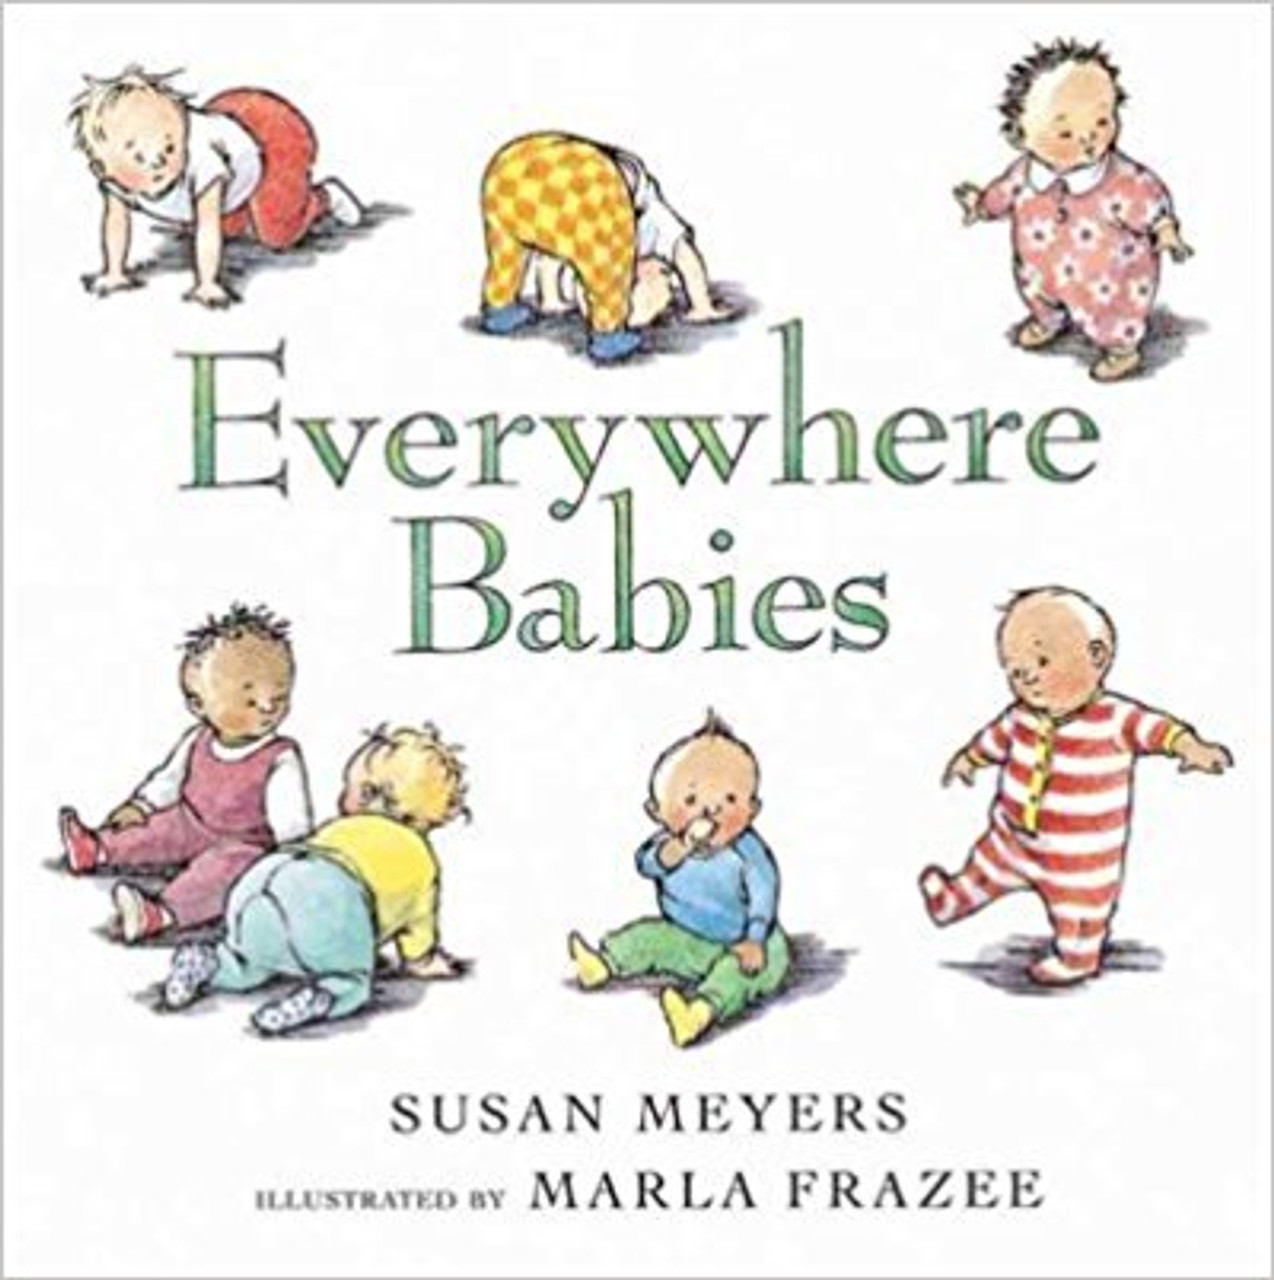 With an irresistible rhyme and delightfully endearing illustrations, this board book is an exuberant celebration of playing, sleeping, crawling, and doing all the wonderful things babies do best. Full color.